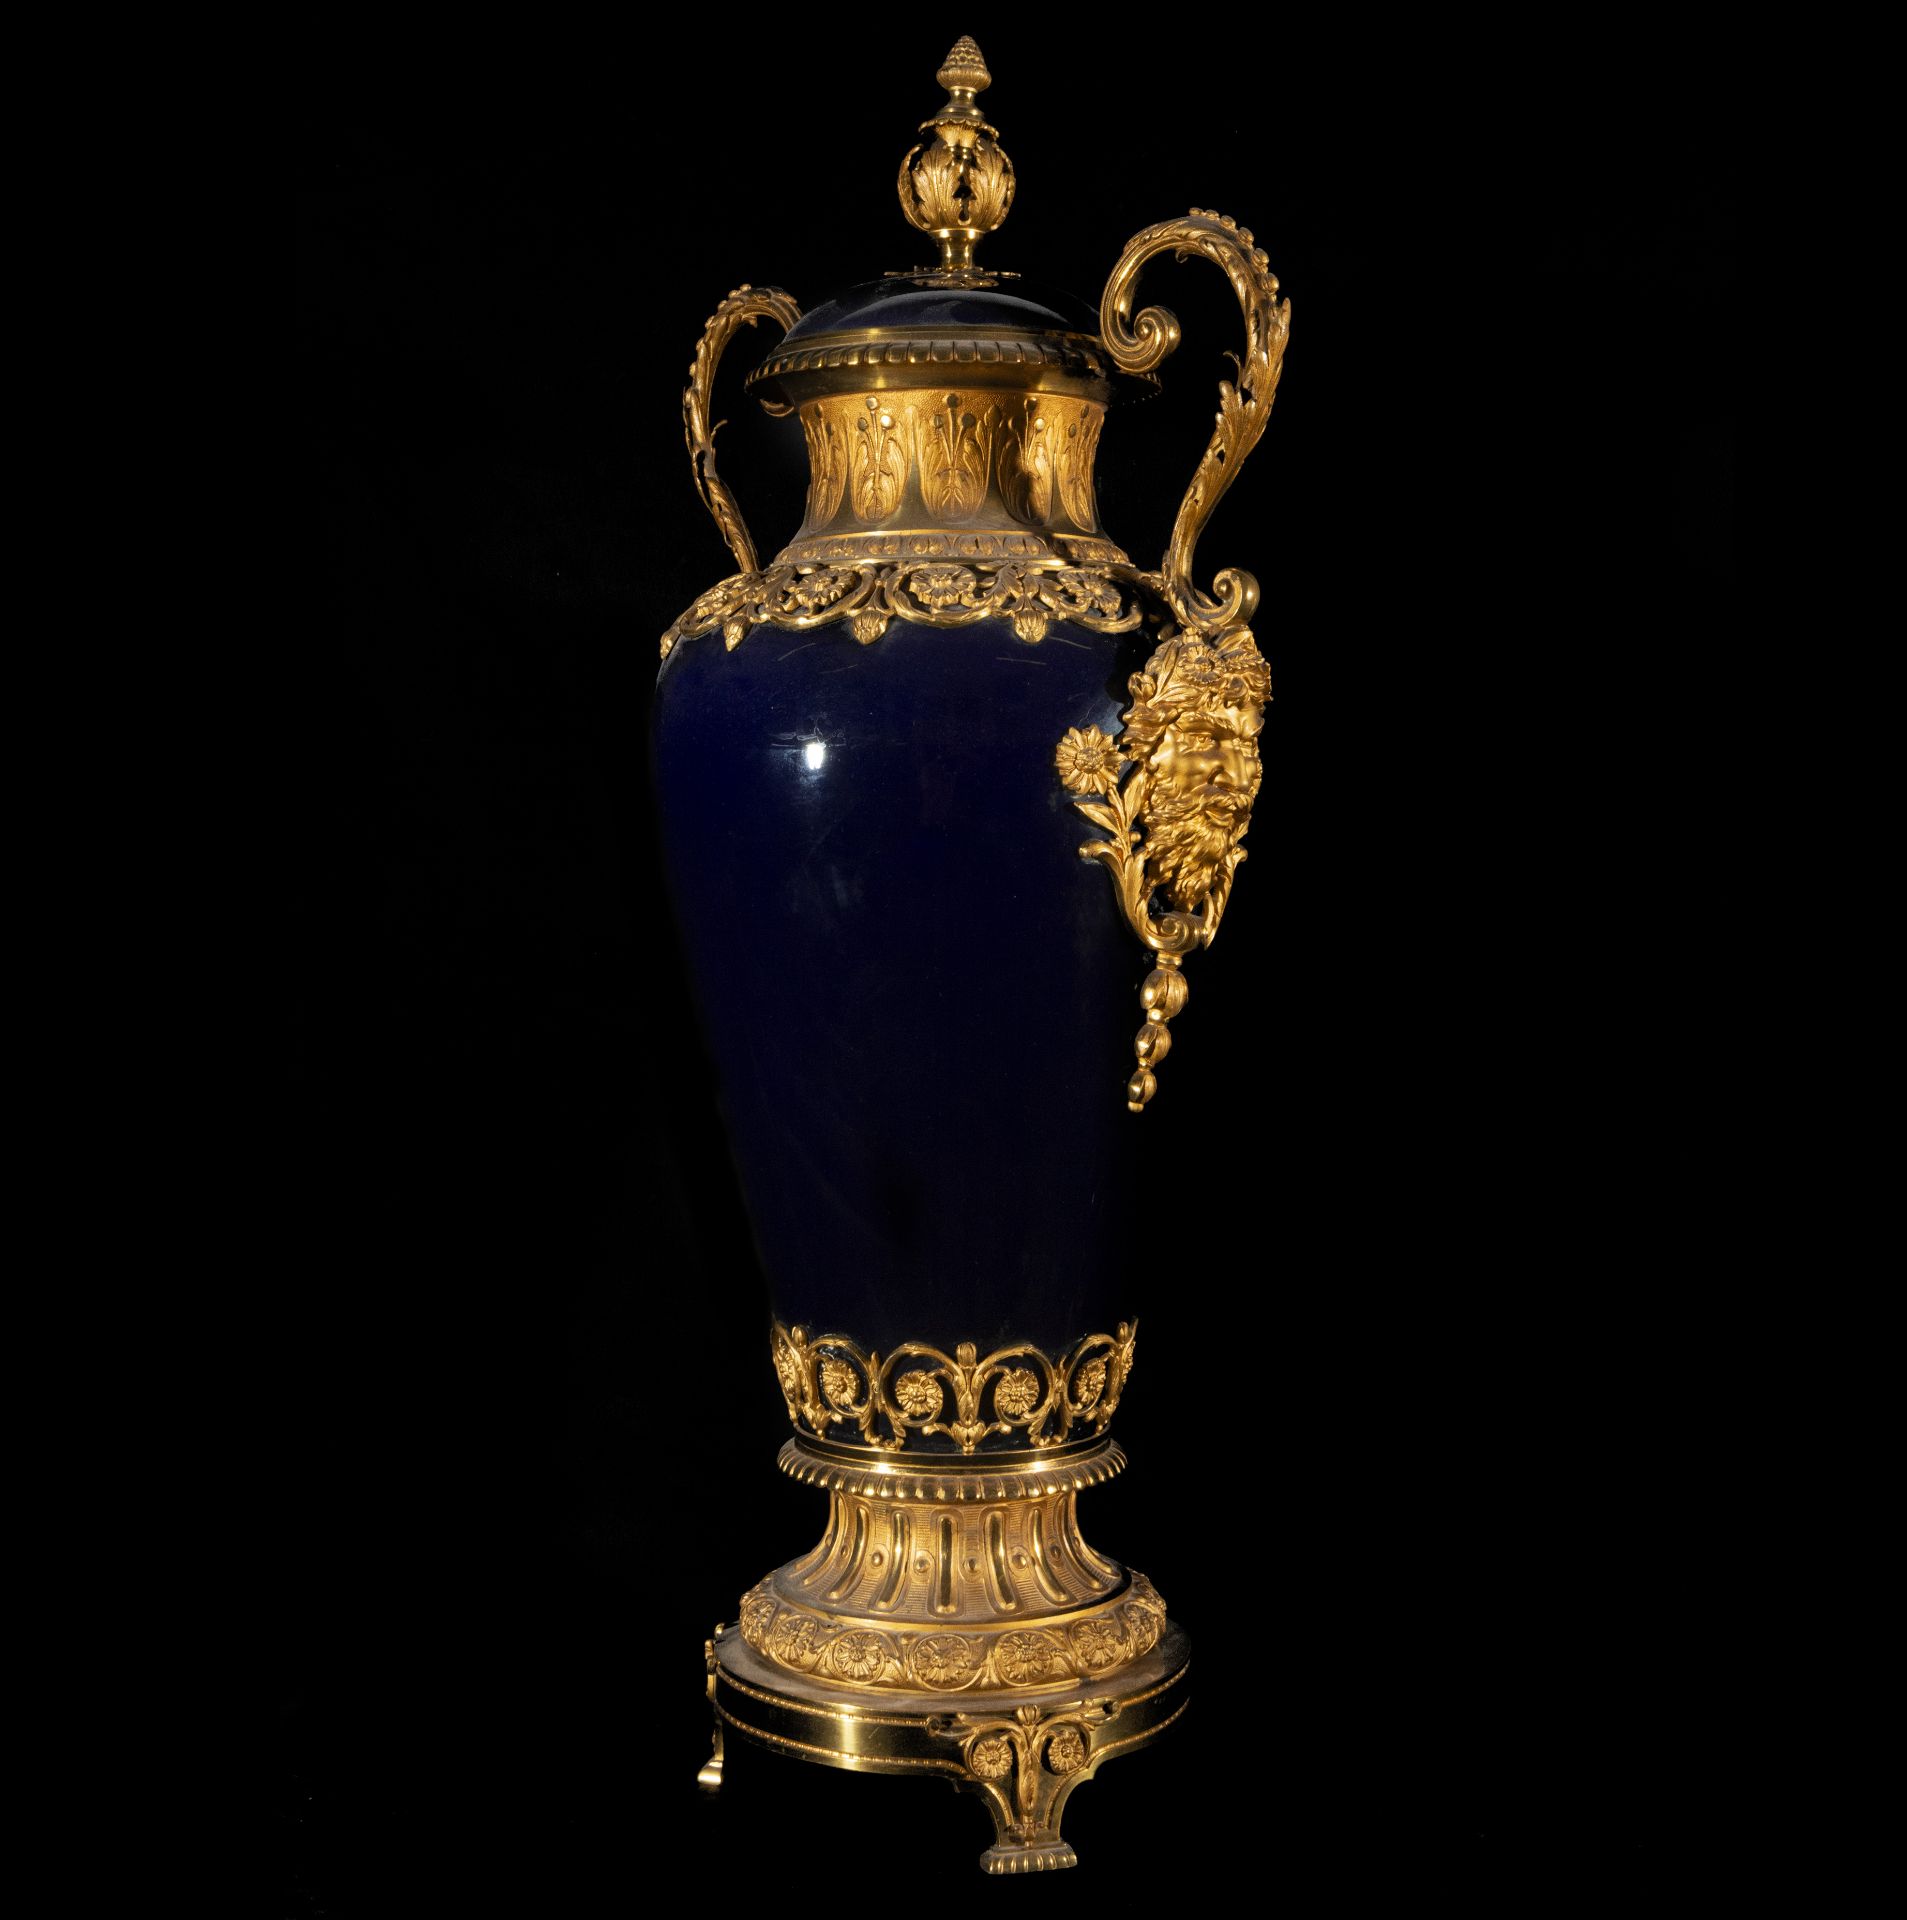 Pair of Large Sevres Vases in "Bleu Celeste" porcelain from the 19th century - Image 4 of 9